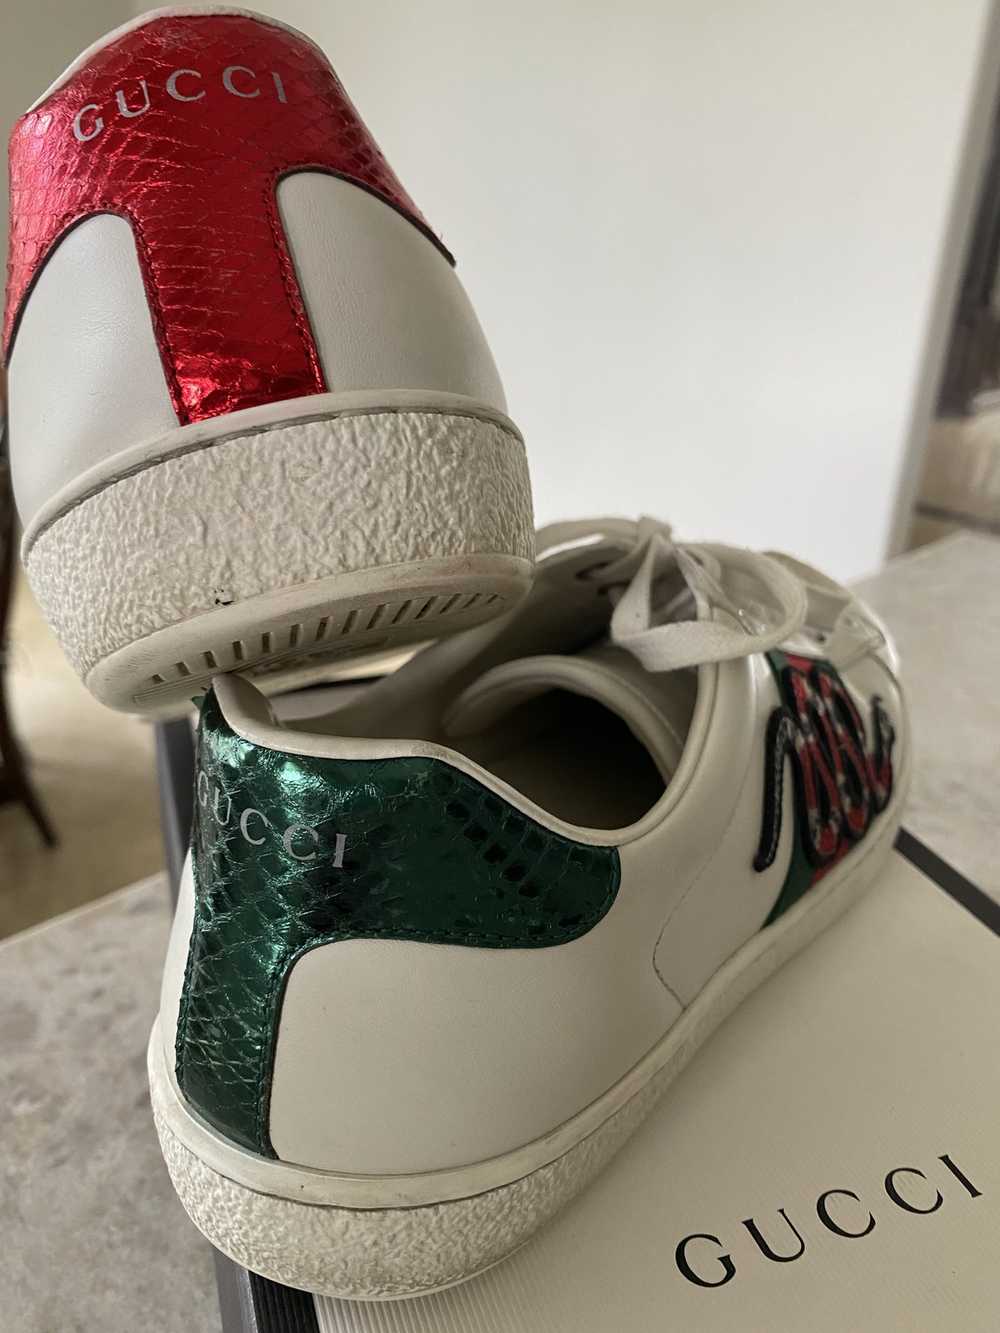 Gucci Ace Snake Sneakers - image 8